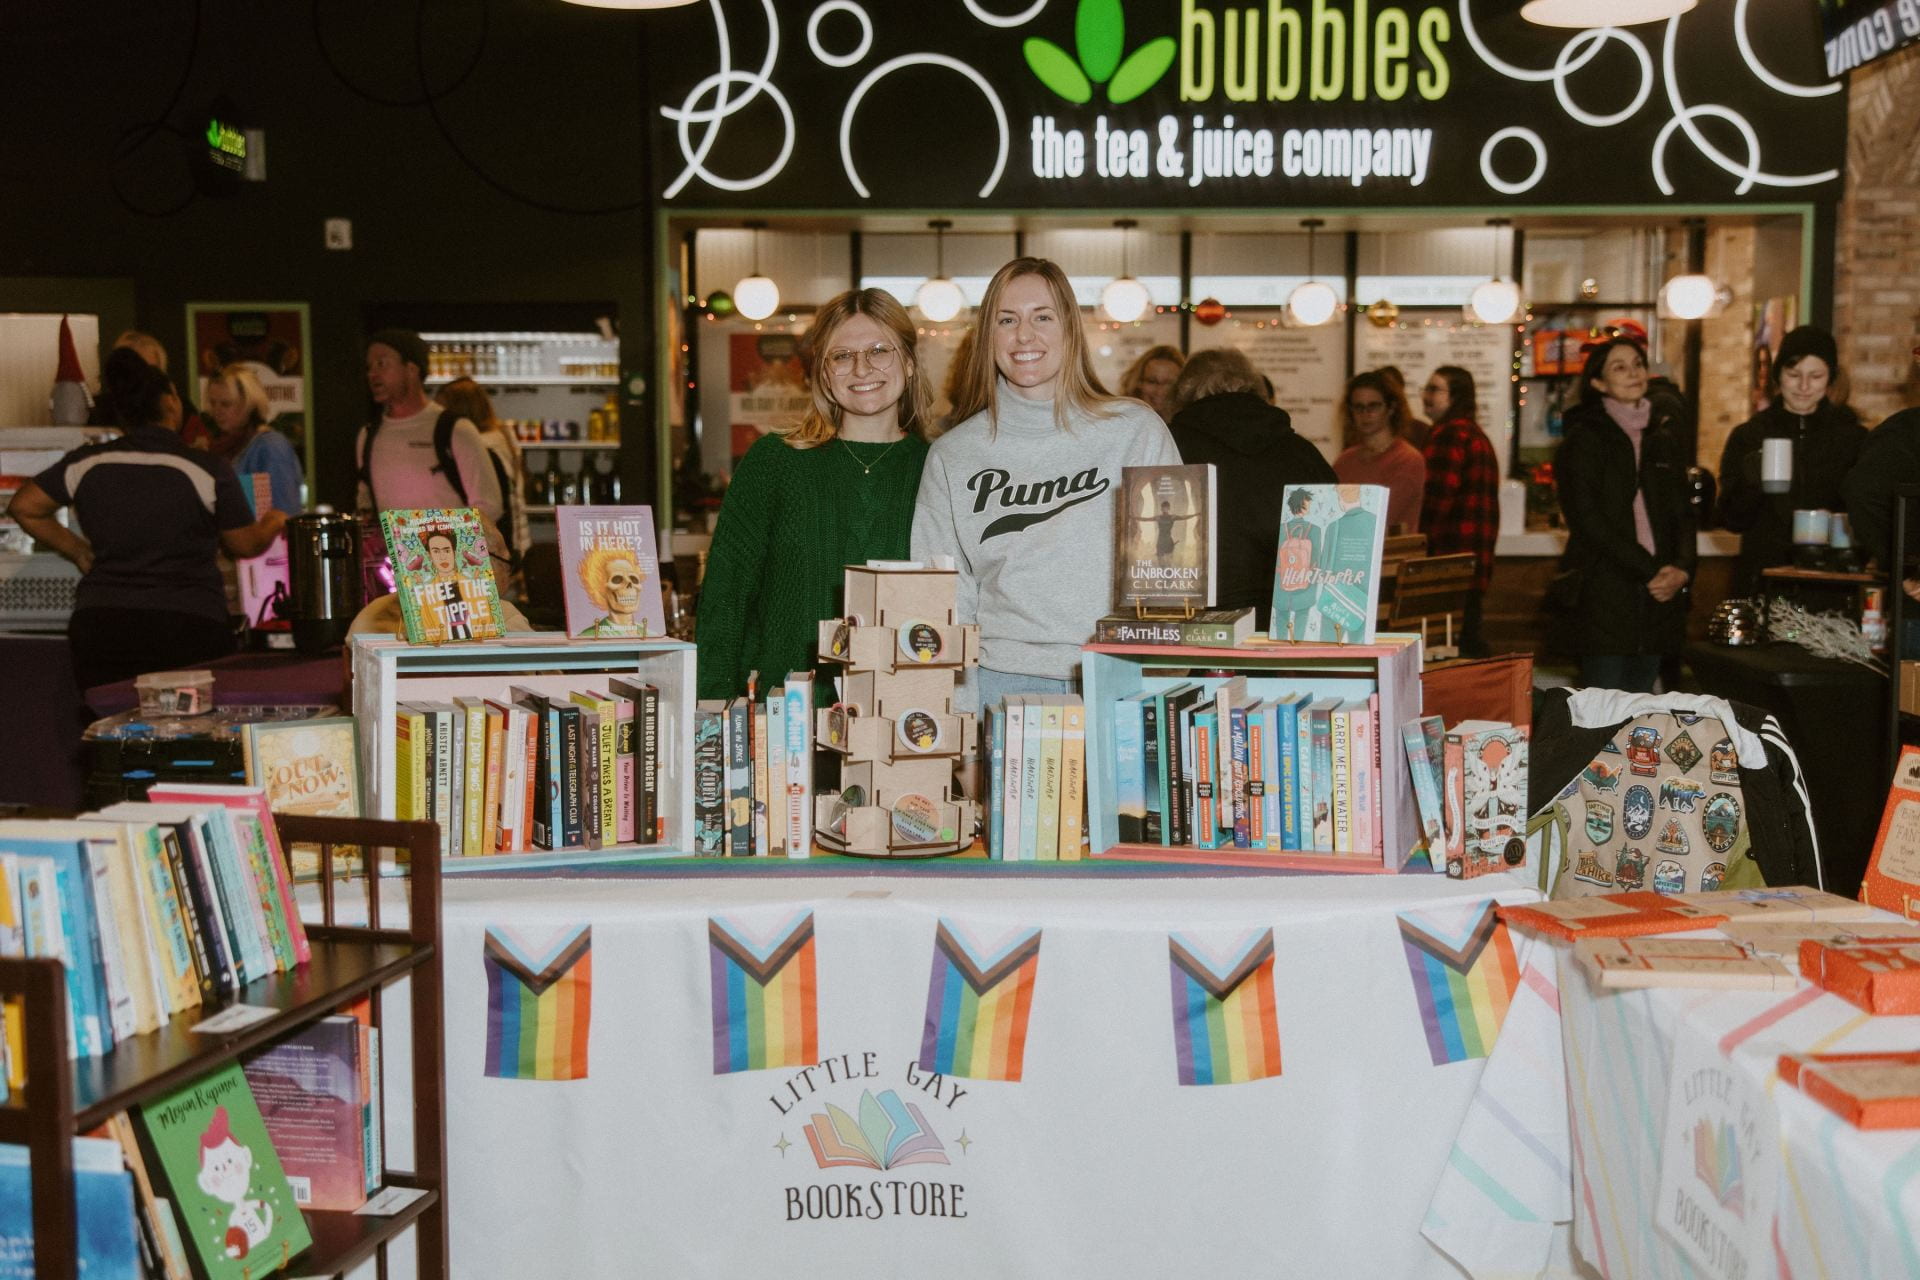 Co-founders and couple Reese Steiner (left) and Lauren Branch (right) behind the Little Gay Bookstore booth at the North Market in Bridge Park's annual Holiday Market, located in Dublin, Ohio, on Dec. 16. Credit: Abby Gongwer